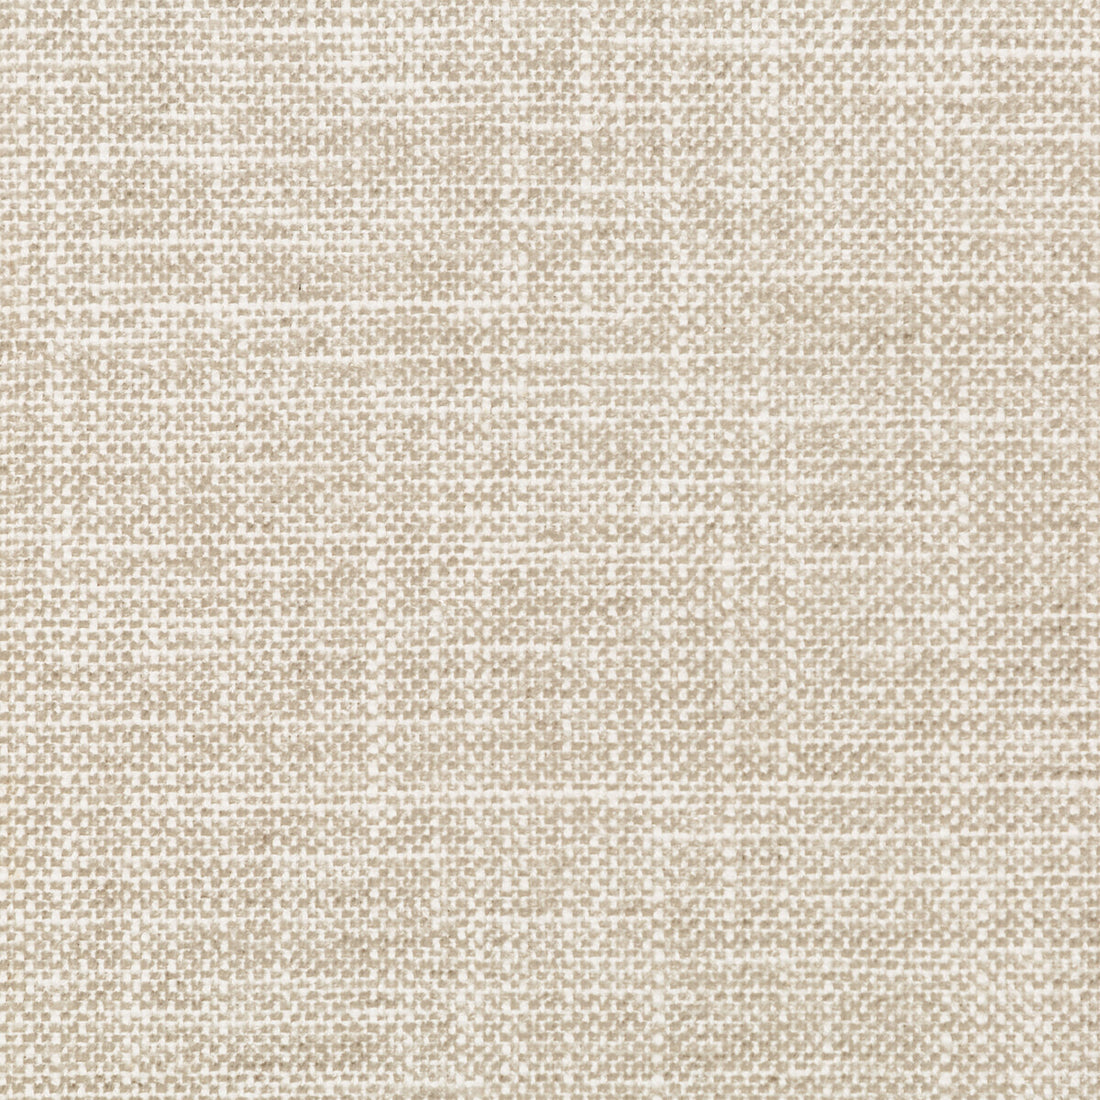 Okanda fabric in oatmeal color - pattern 35768.106.0 - by Kravet Smart in the Performance Kravetarmor collection